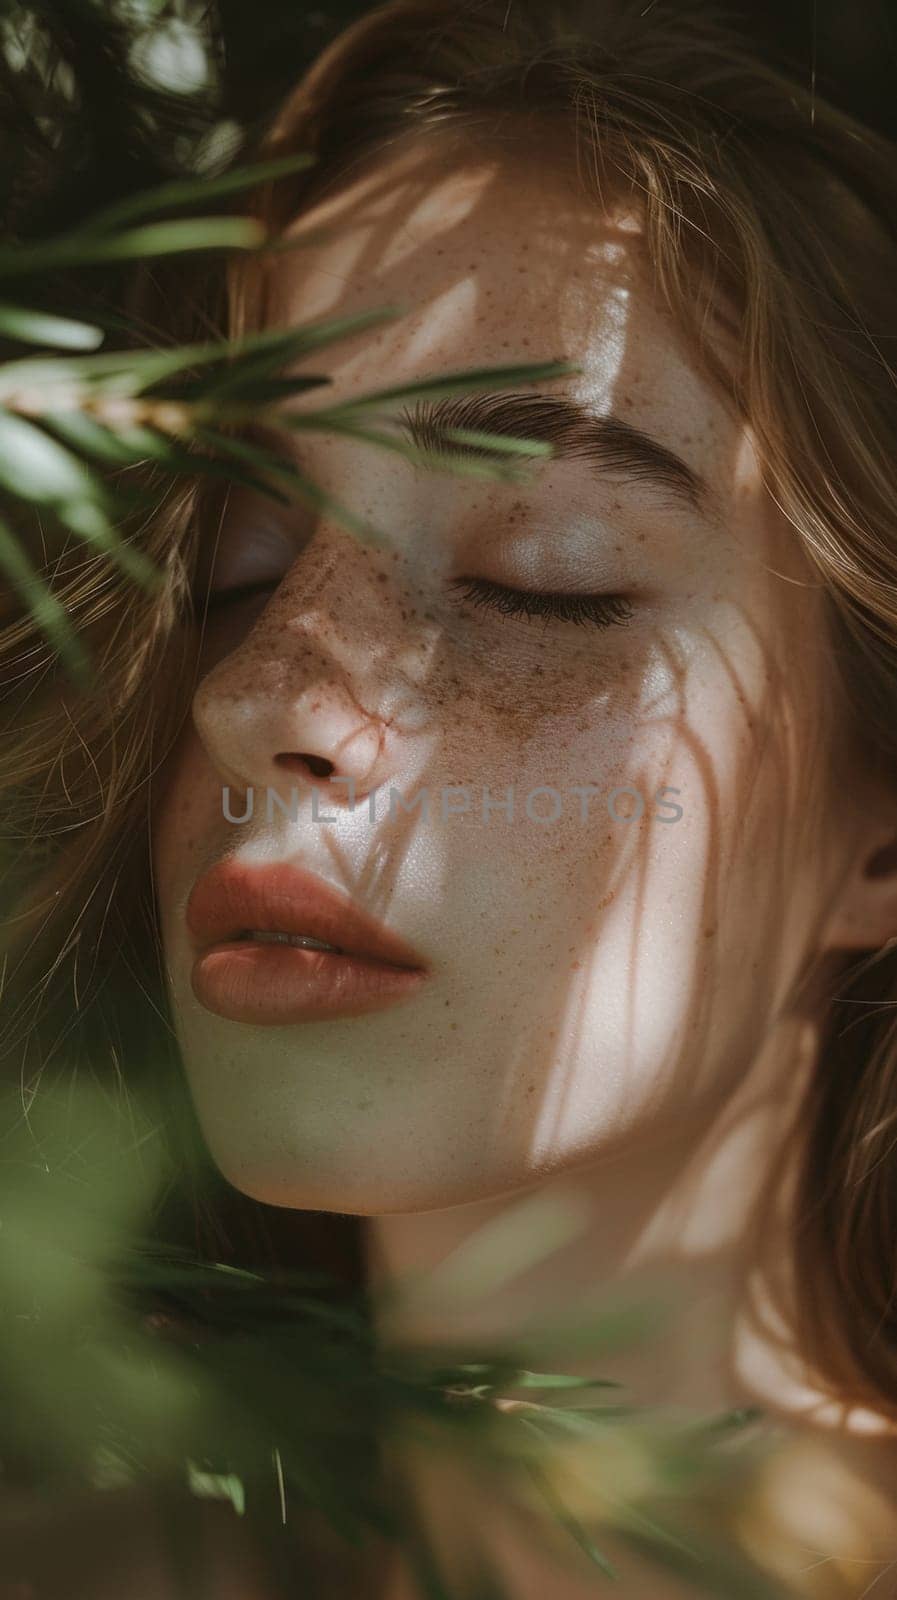 A woman with freckles and eyes closed in the shade